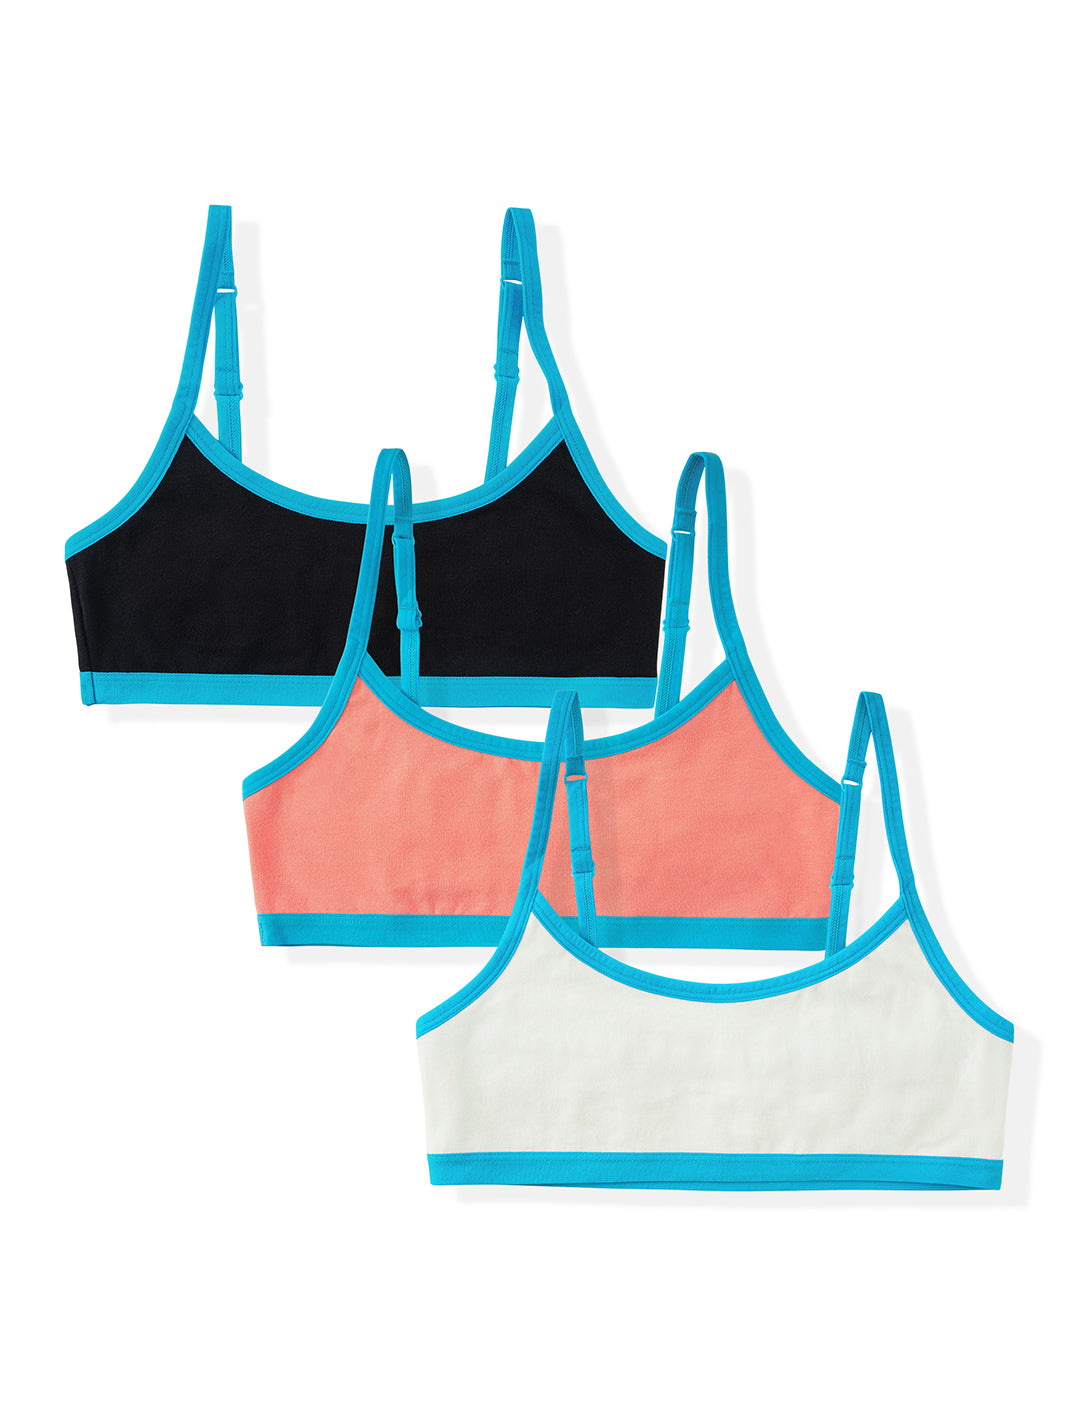 Girls Cotton Bra Teens Sports Bra Training,Youth over 12 Years Old,1 Pack